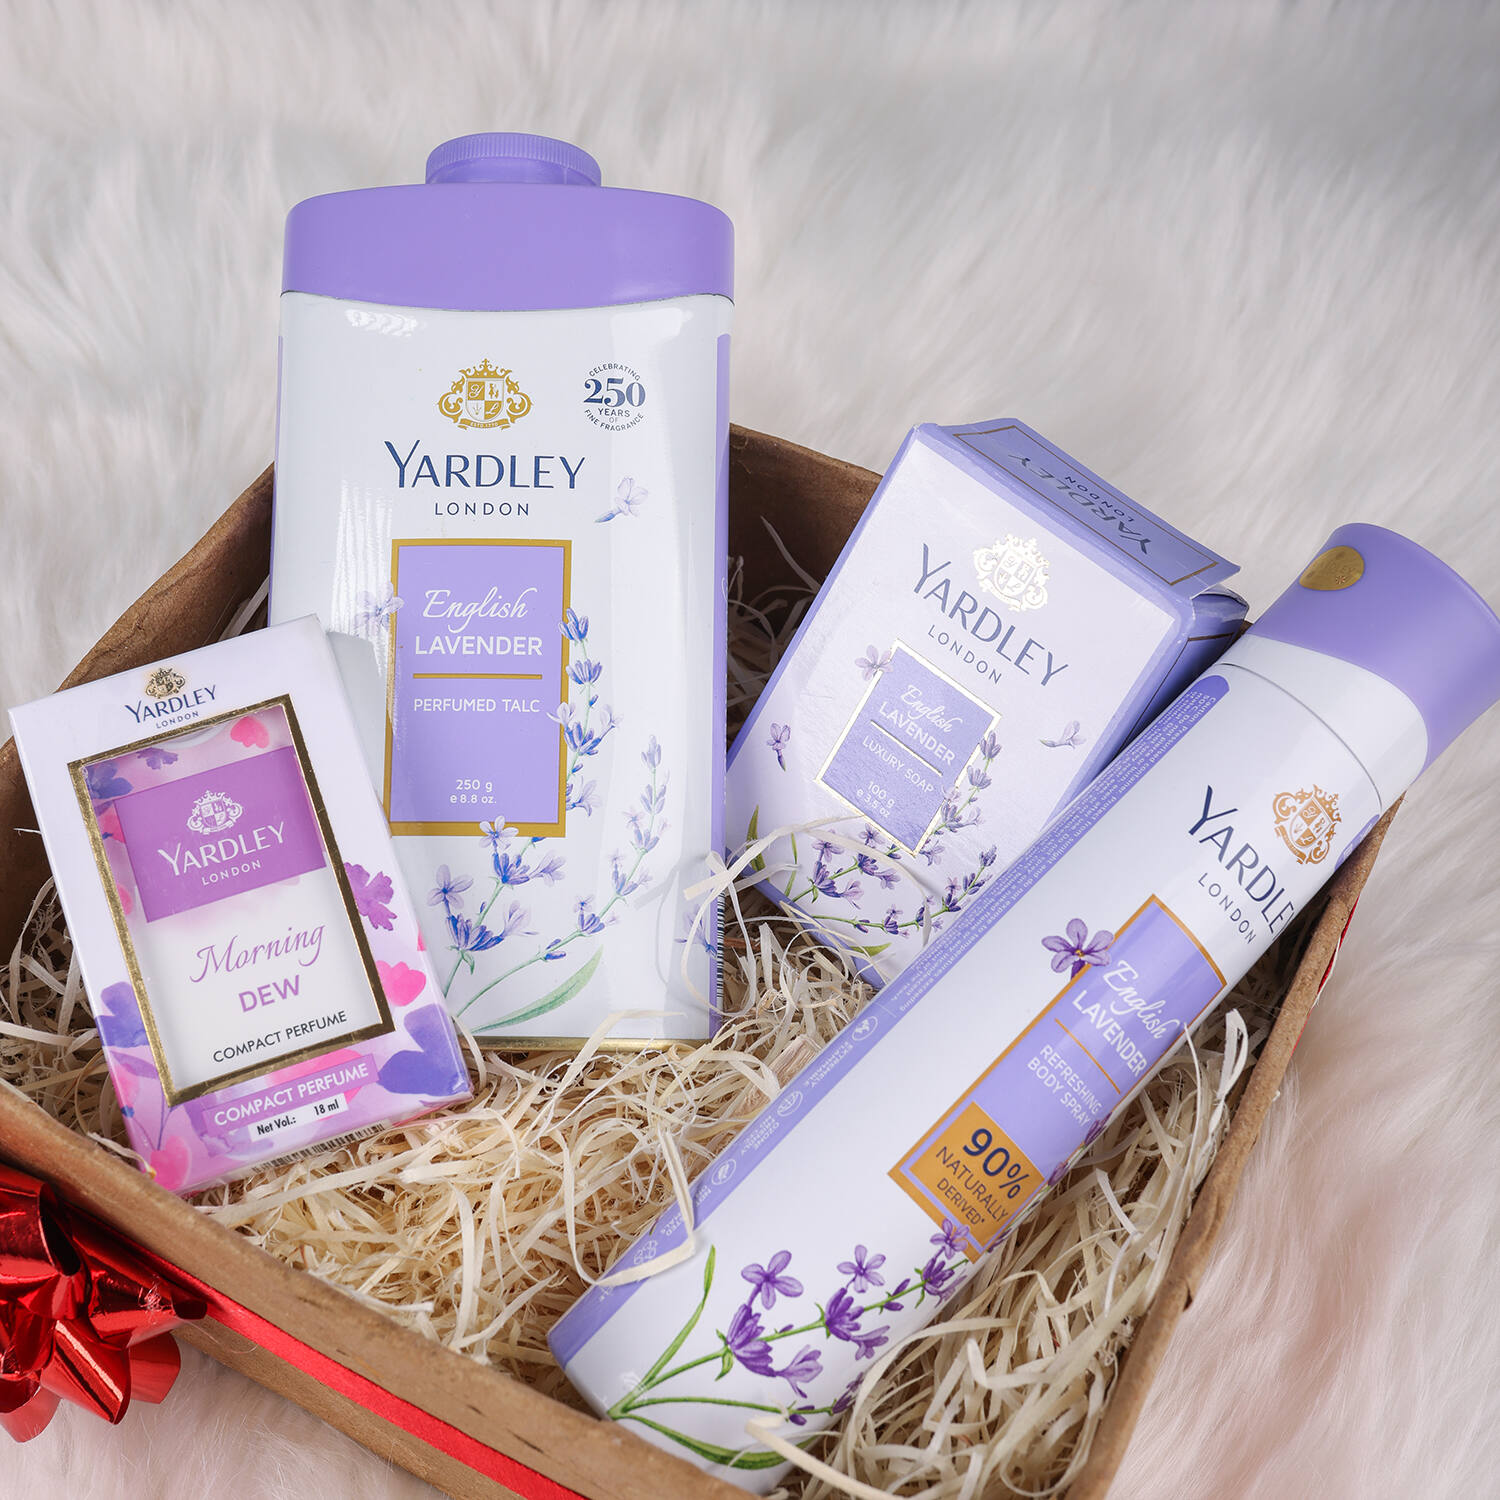 Buy Yardley London English Lavender Range Gift Bag With Compact Perfume,  Perfumed Talc, Refreshing Body Spray, & Luxury Soap For Women| Long-Lasting  Fragrance| Stylish Travel Pack Included Online at Low Prices in